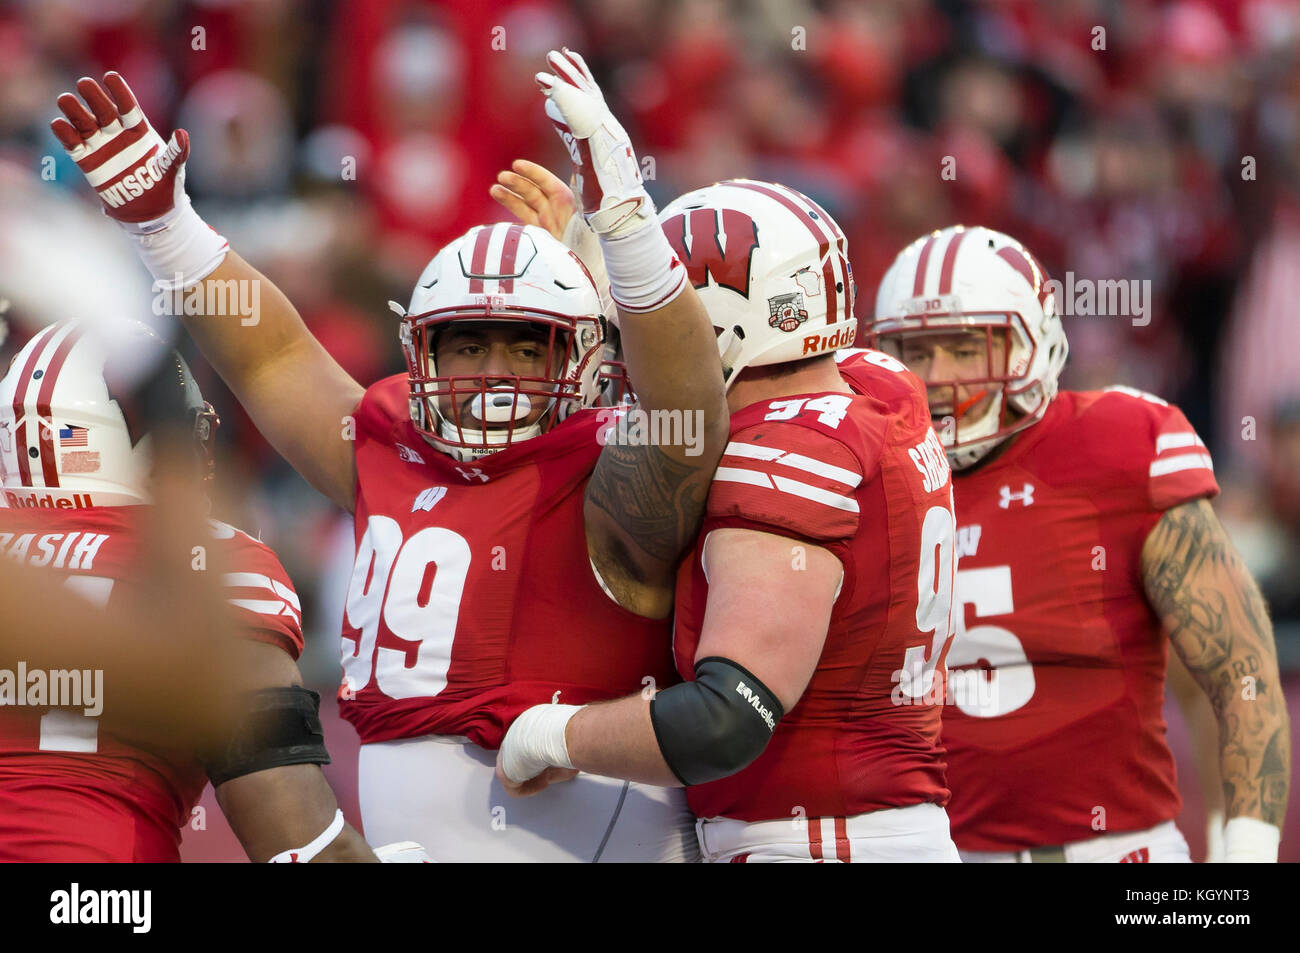 Madison, WI, USA. 11th Nov, 2017. Wisconsin Badgers nose tackle Olive Sagapolu #99 celebrates a sack during the NCAA Football game between the Iowa Hawkeyes and the Wisconsin Badgers at Camp Randall Stadium in Madison, WI. Wisconsin defeated Iowa 38-14. John Fisher/CSM/Alamy Live News Stock Photo